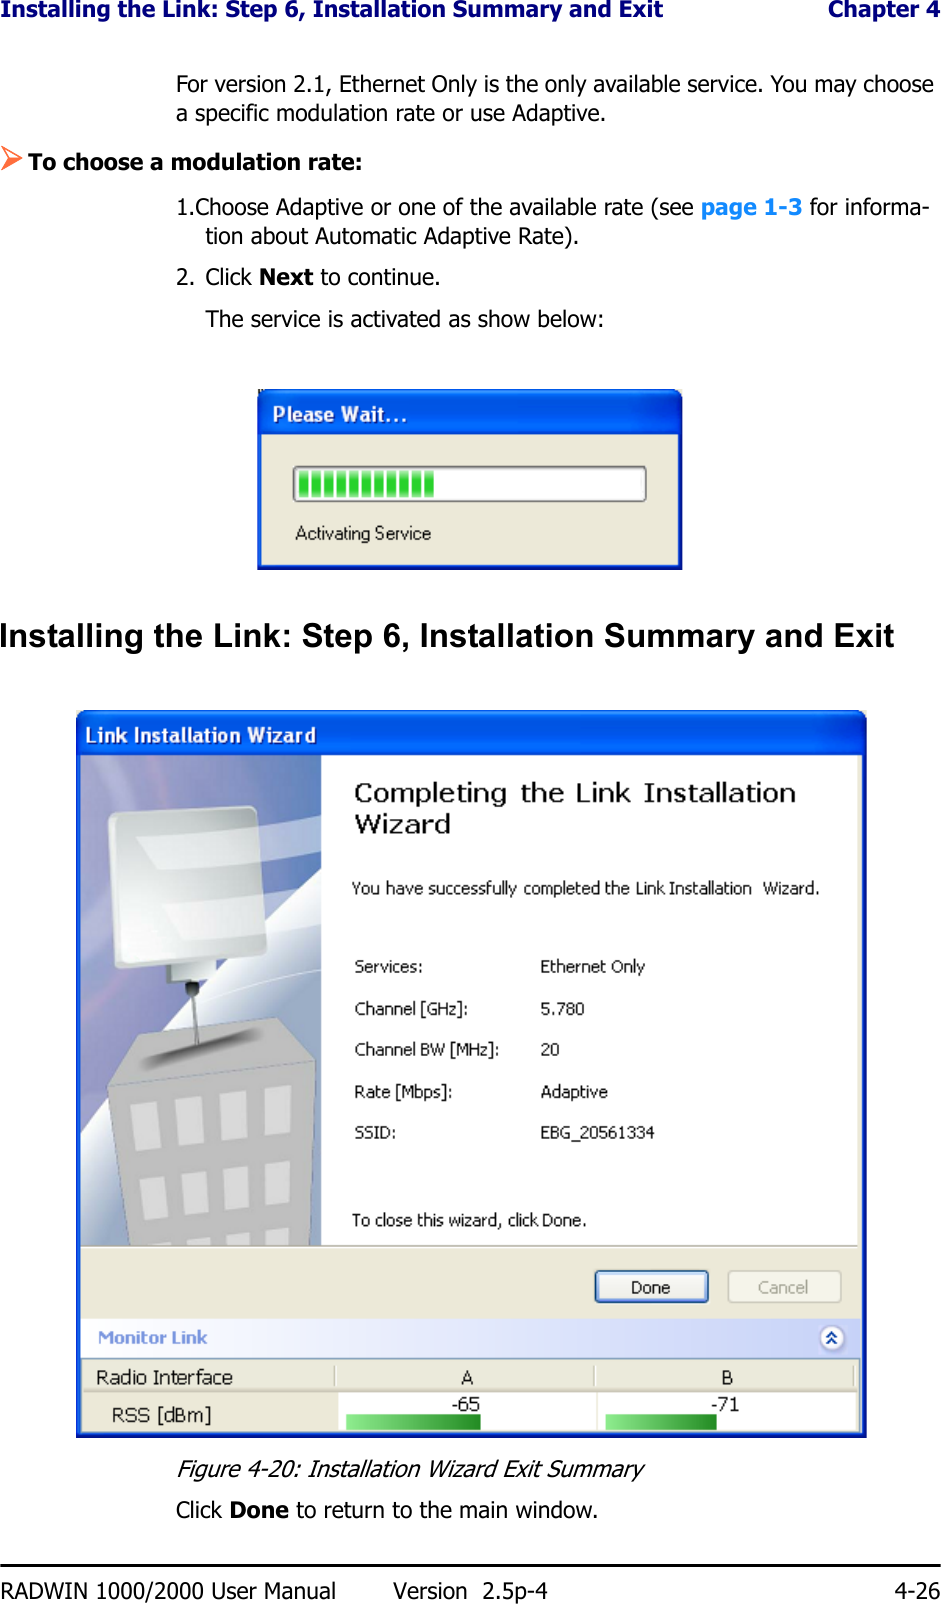 Installing the Link: Step 6, Installation Summary and Exit  Chapter 4RADWIN 1000/2000 User Manual Version  2.5p-4 4-26For version 2.1, Ethernet Only is the only available service. You may choose a specific modulation rate or use Adaptive.¾To choose a modulation rate:1.Choose Adaptive or one of the available rate (see page 1-3 for informa-tion about Automatic Adaptive Rate).2. Click Next to continue.The service is activated as show below:Installing the Link: Step 6, Installation Summary and ExitFigure 4-20: Installation Wizard Exit Summary Click Done to return to the main window.